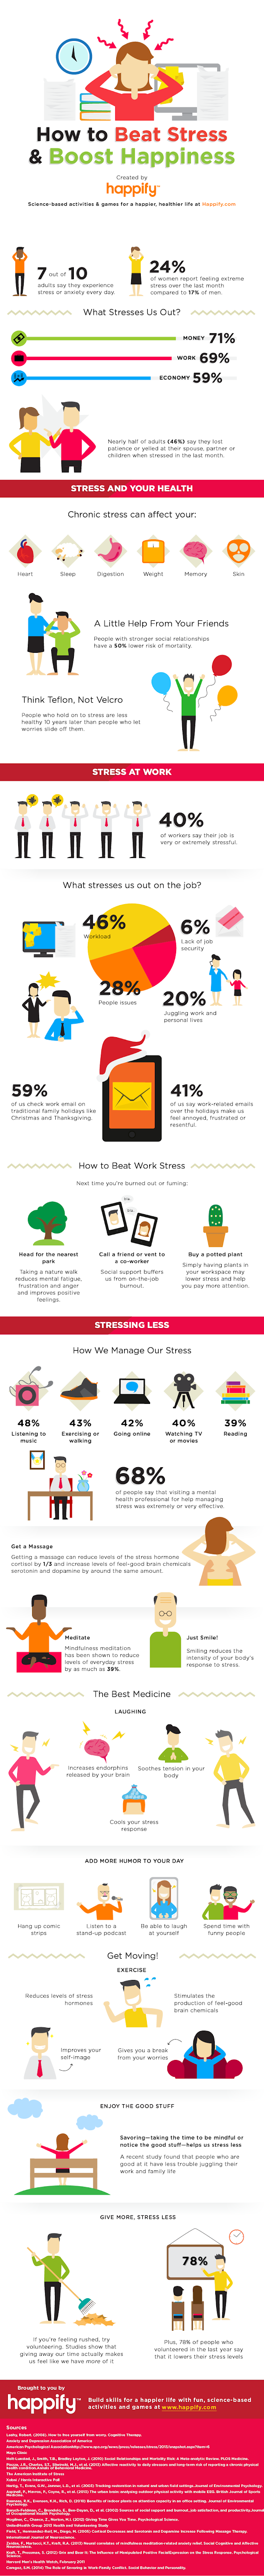 The Fight Against Stress #Infographic